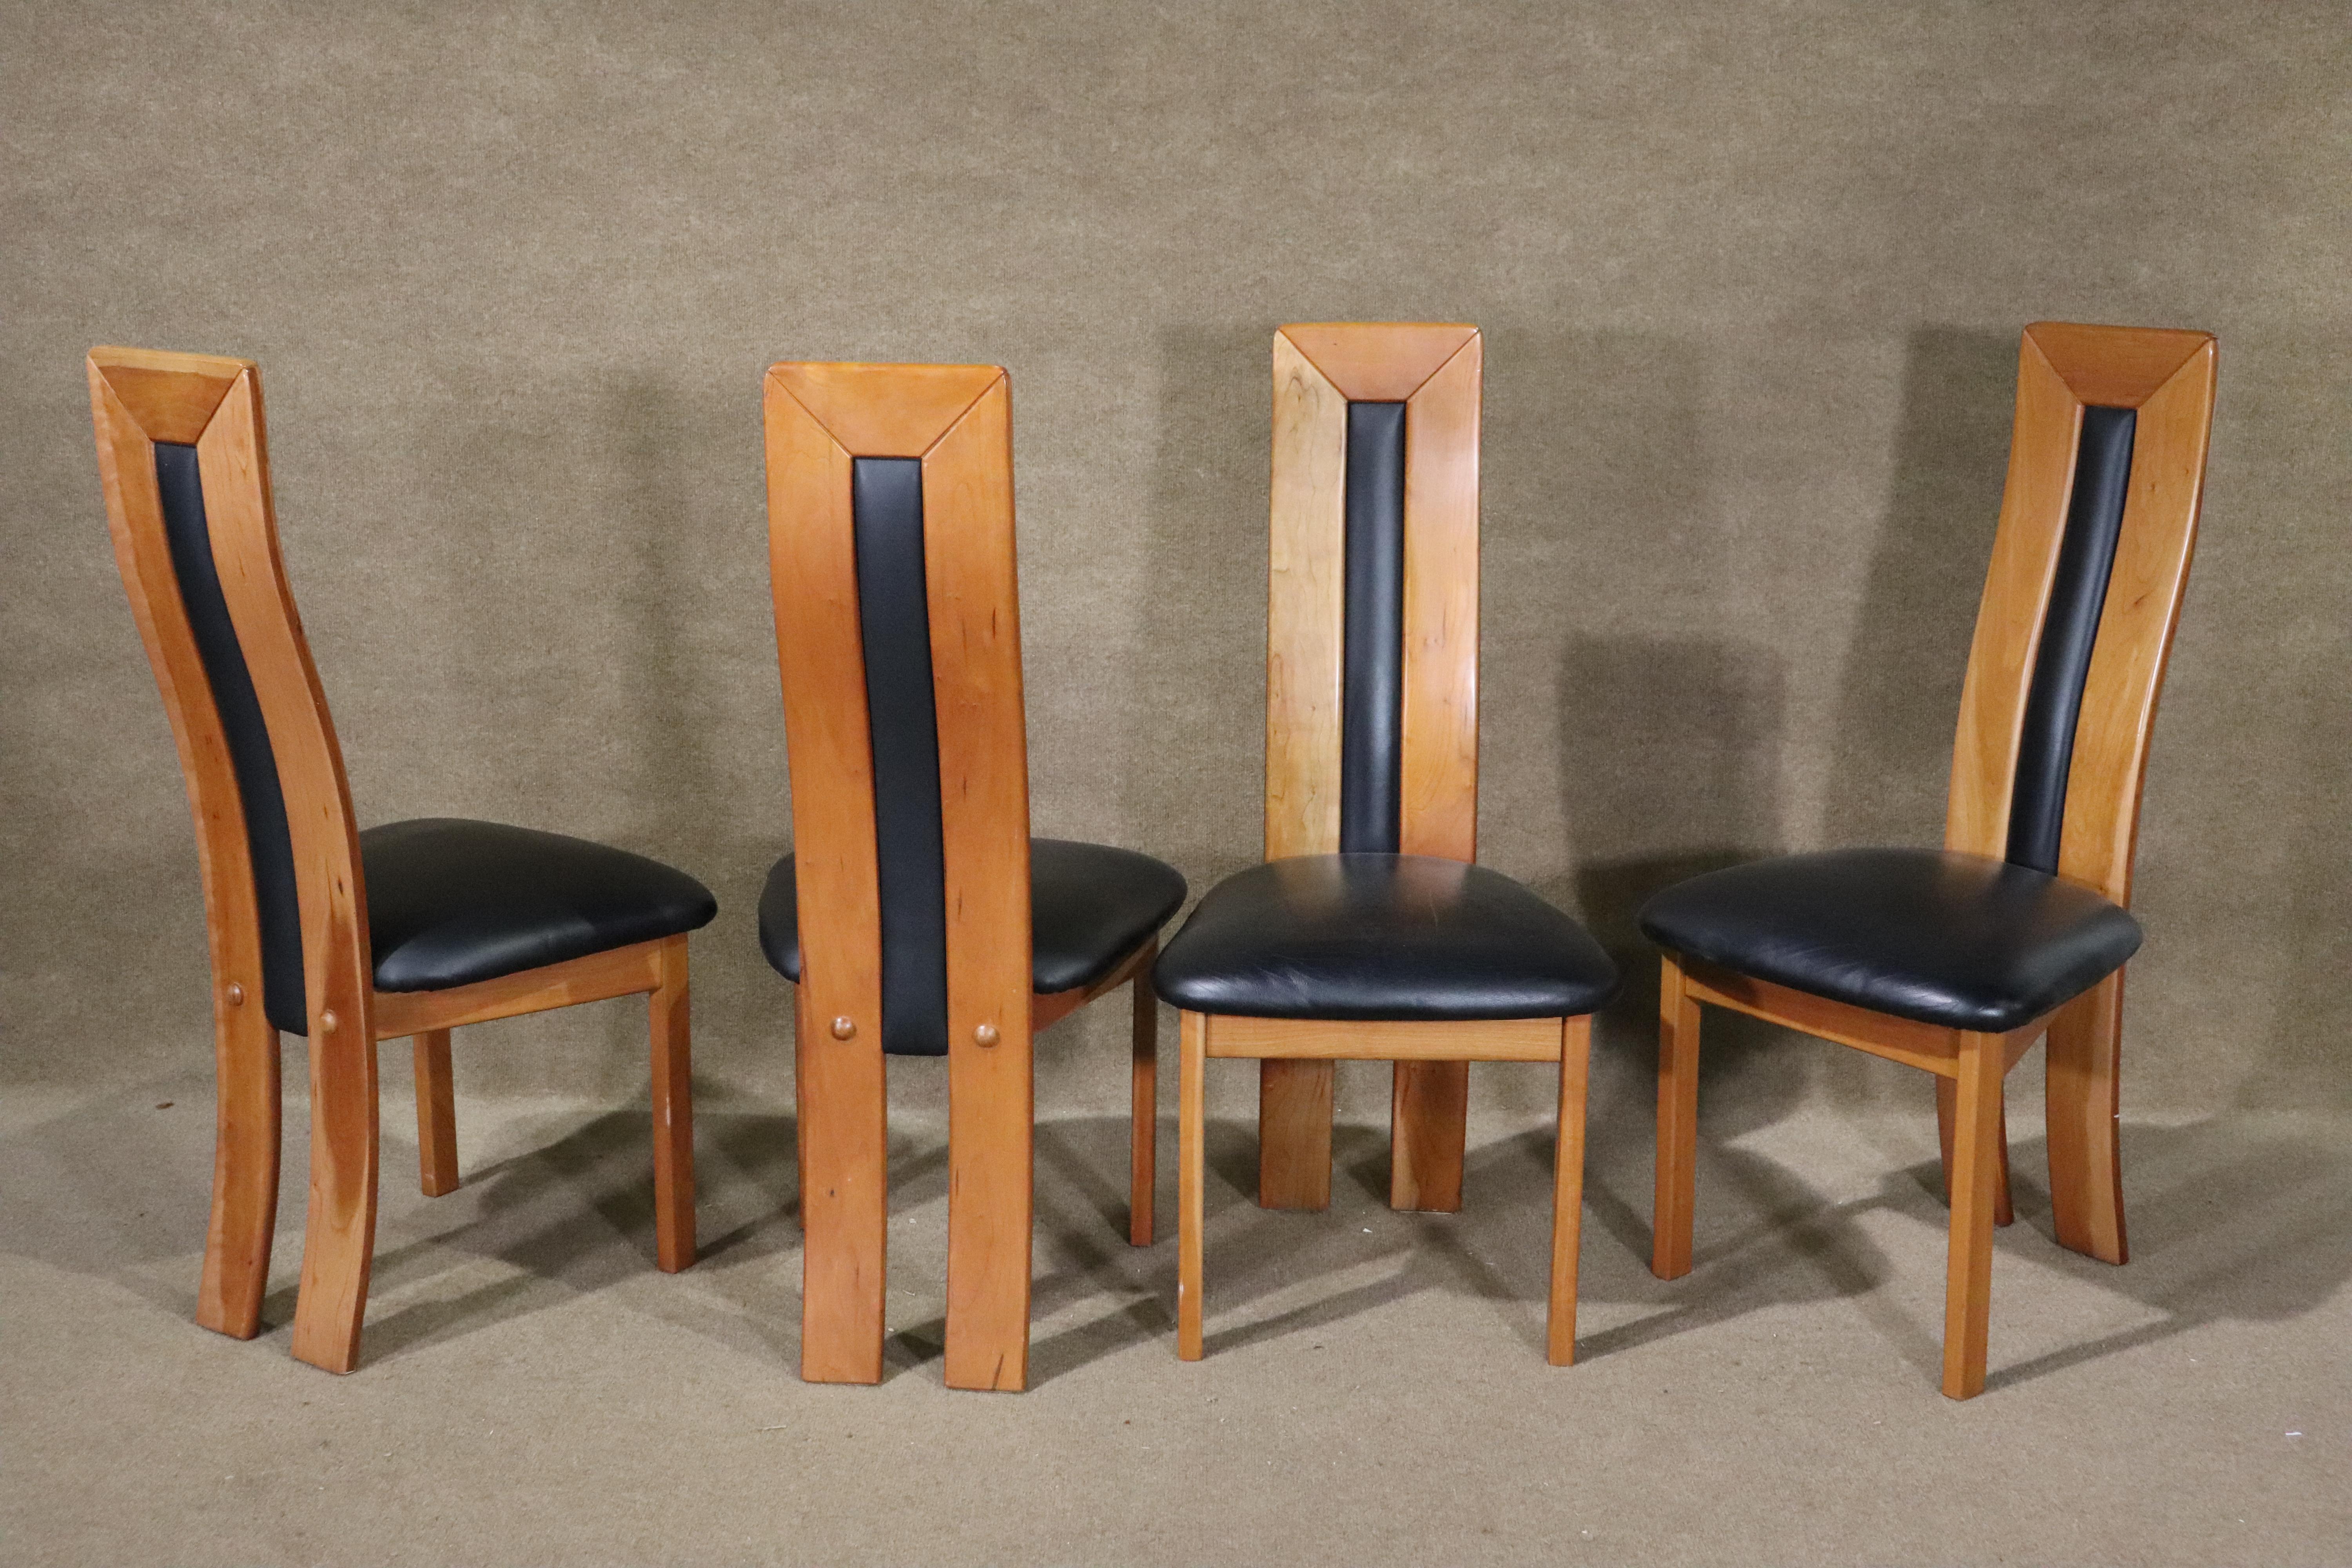 Six tall back dining chairs with leather style material on seats and up the back.
Please confirm location NY or NJ